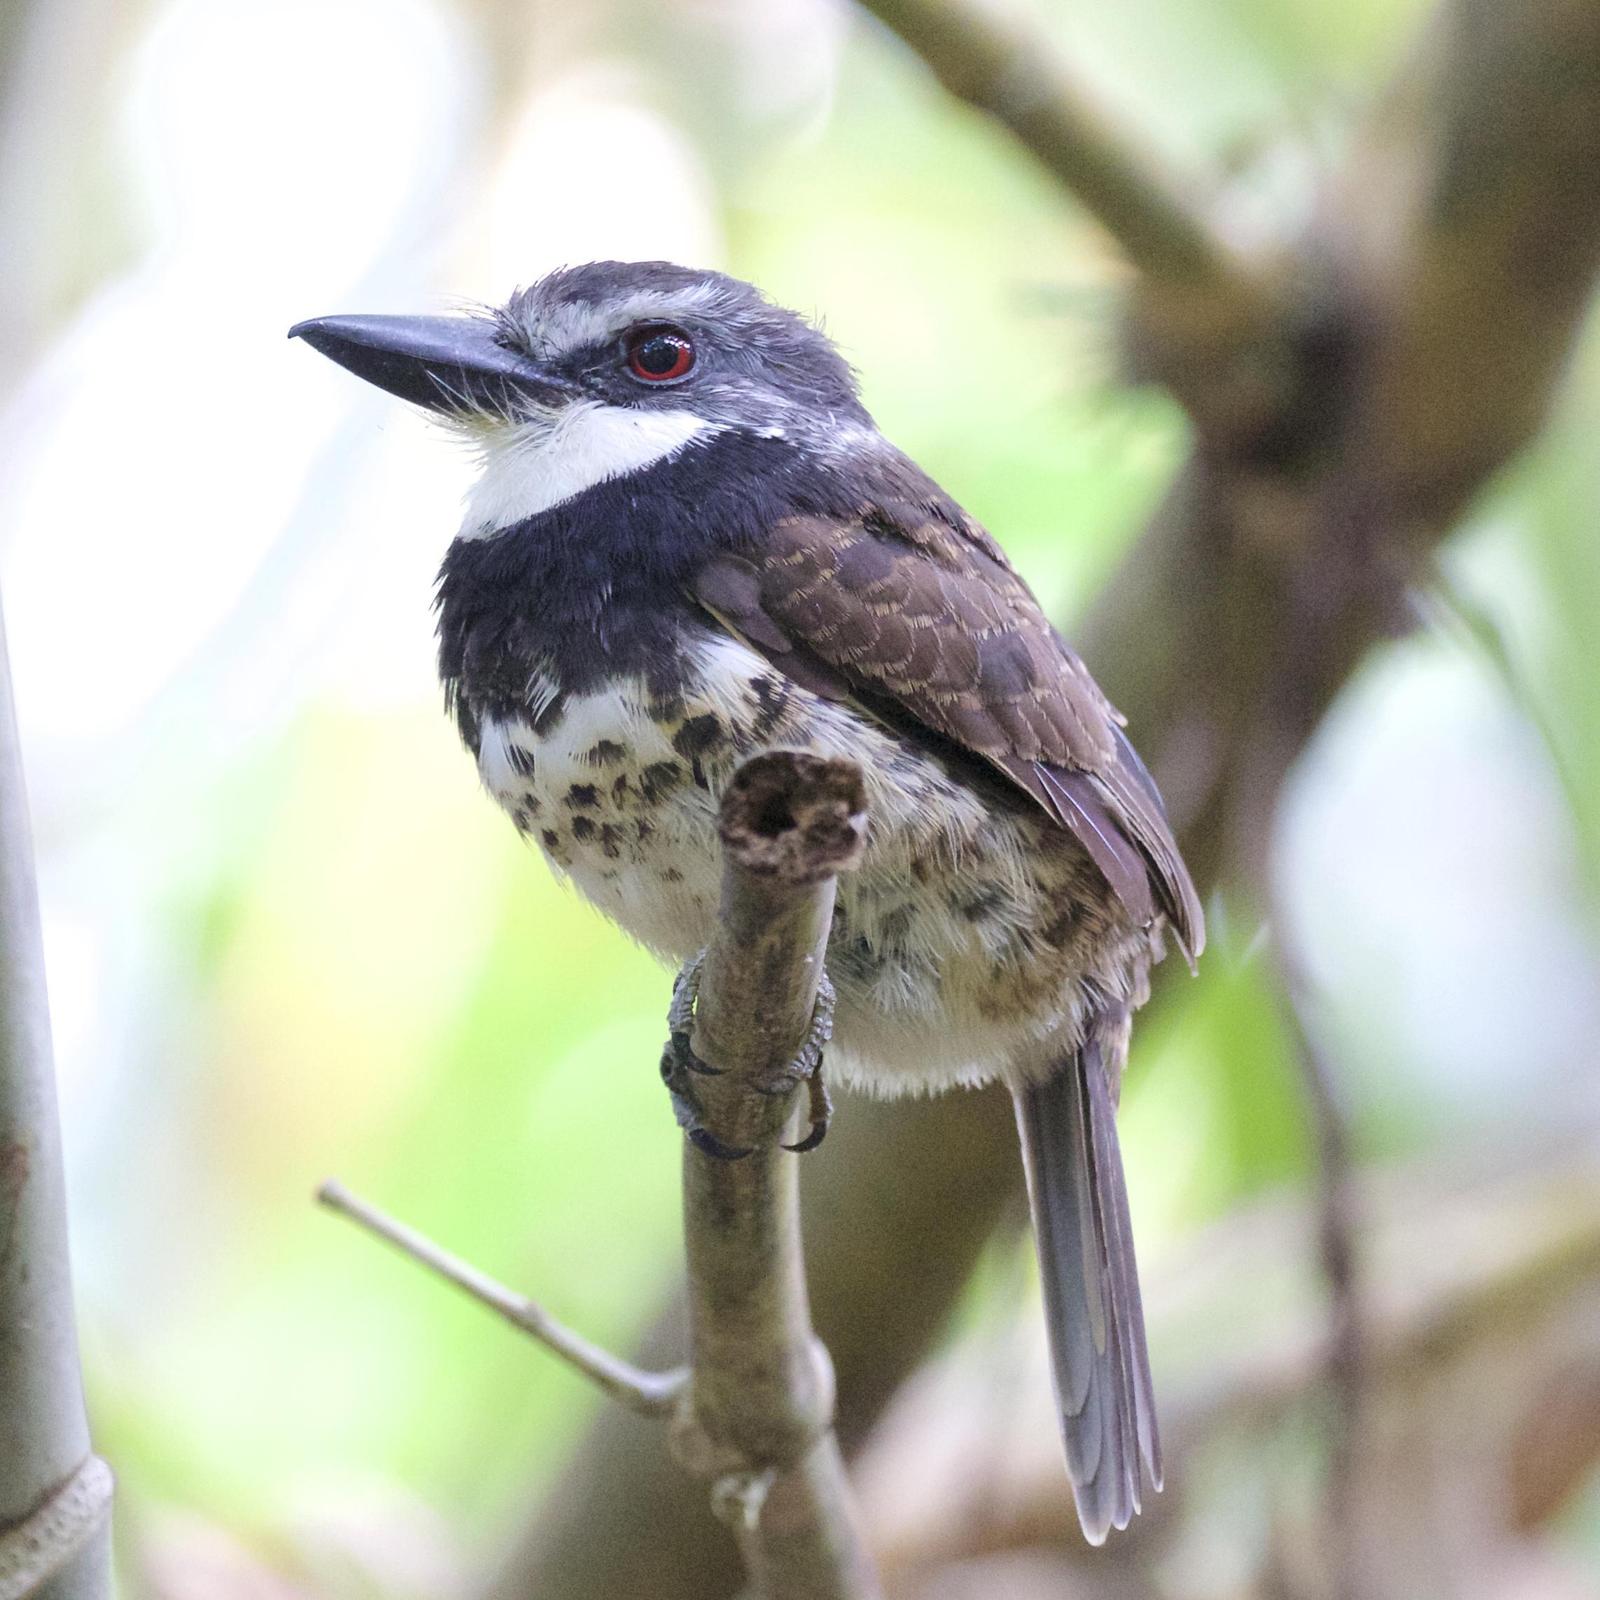 Sooty-capped Puffbird Photo by Nicole Desnoyers